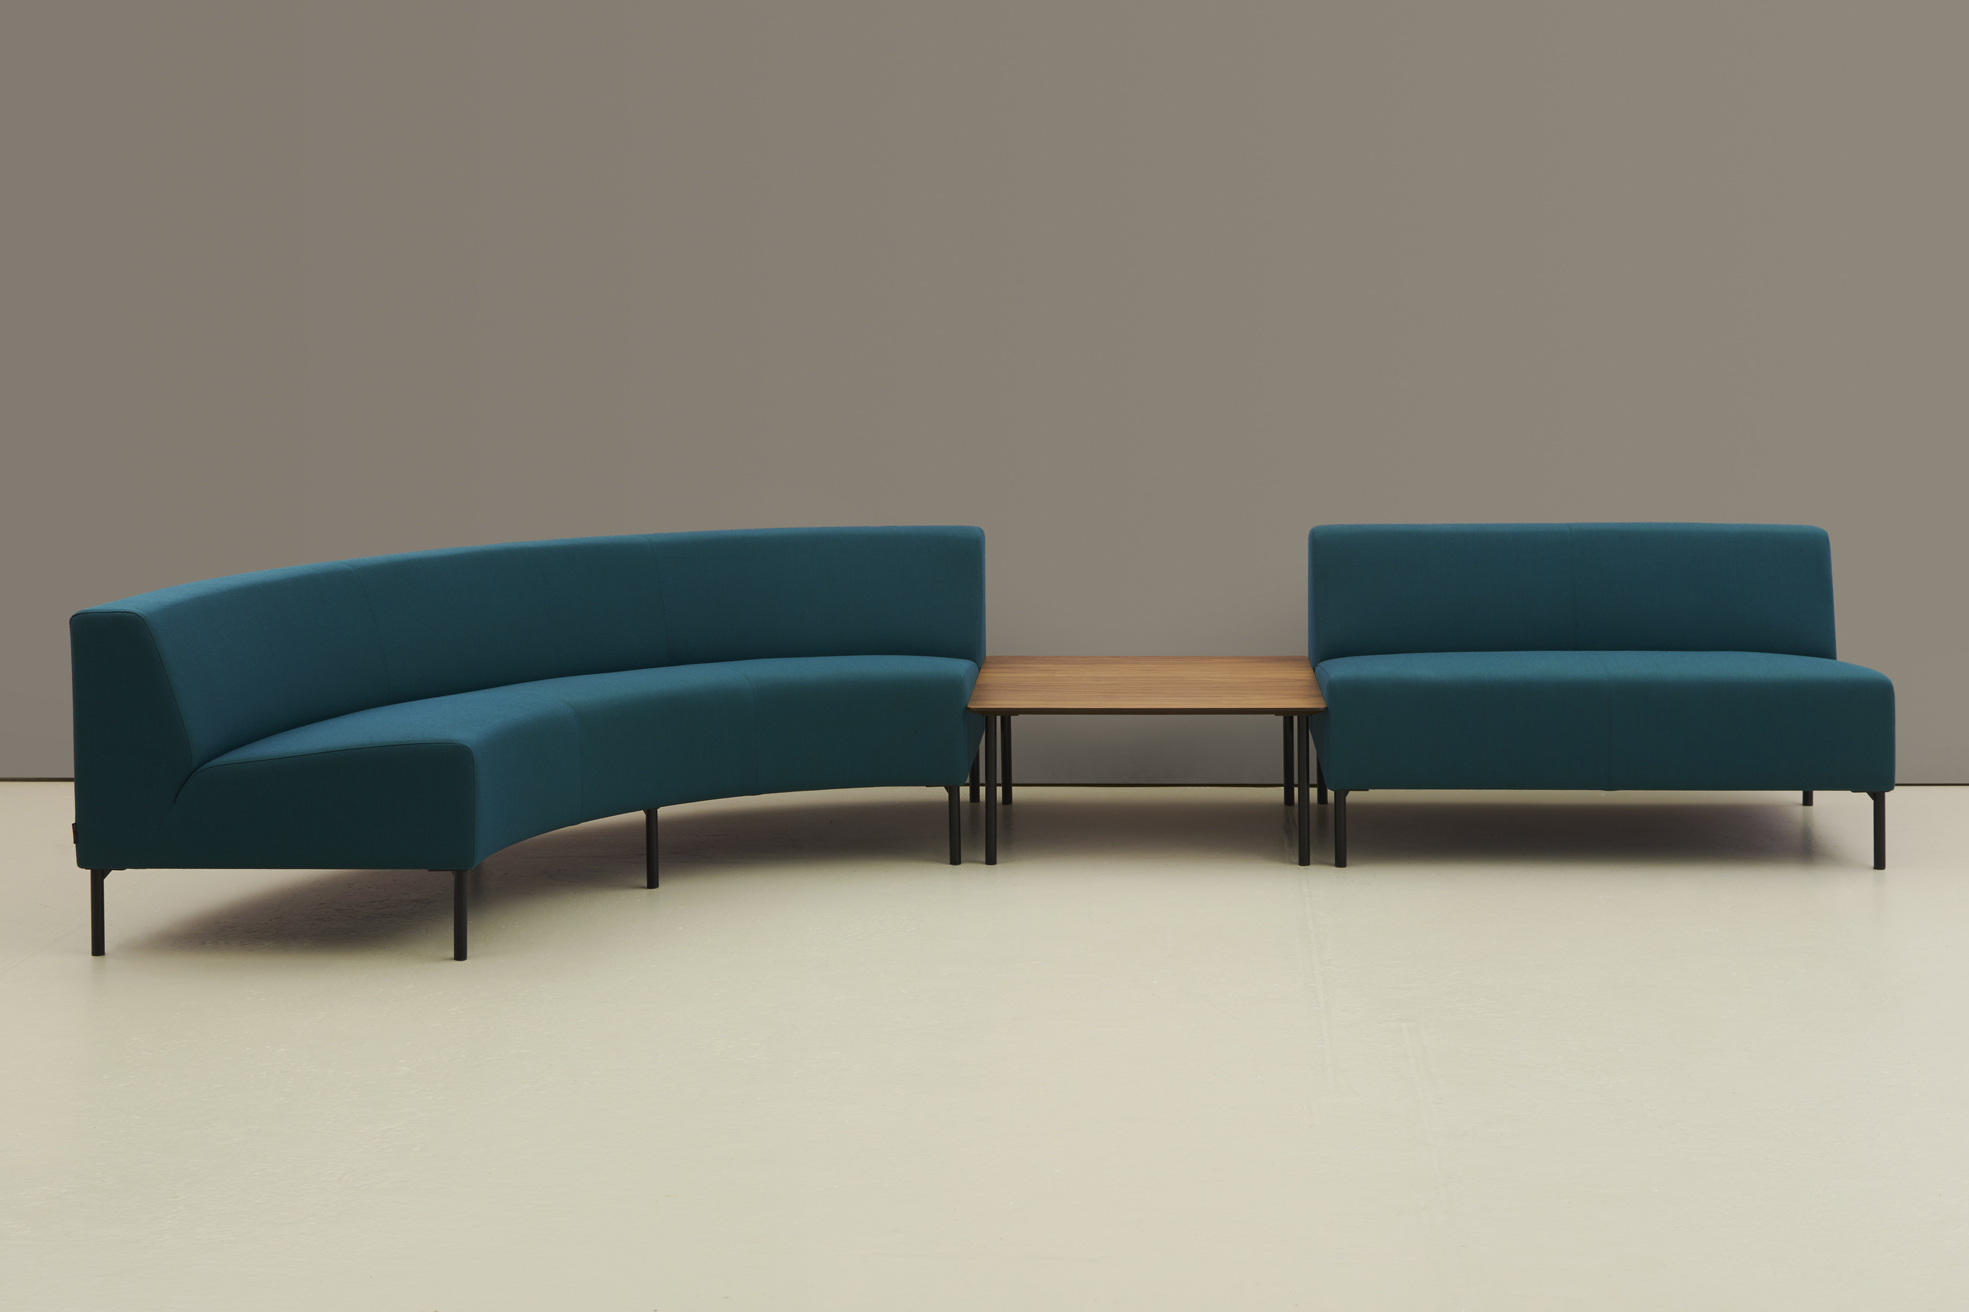 hm18y1 curved sofa, hm18f and hm18r table (1) (low res).jpg